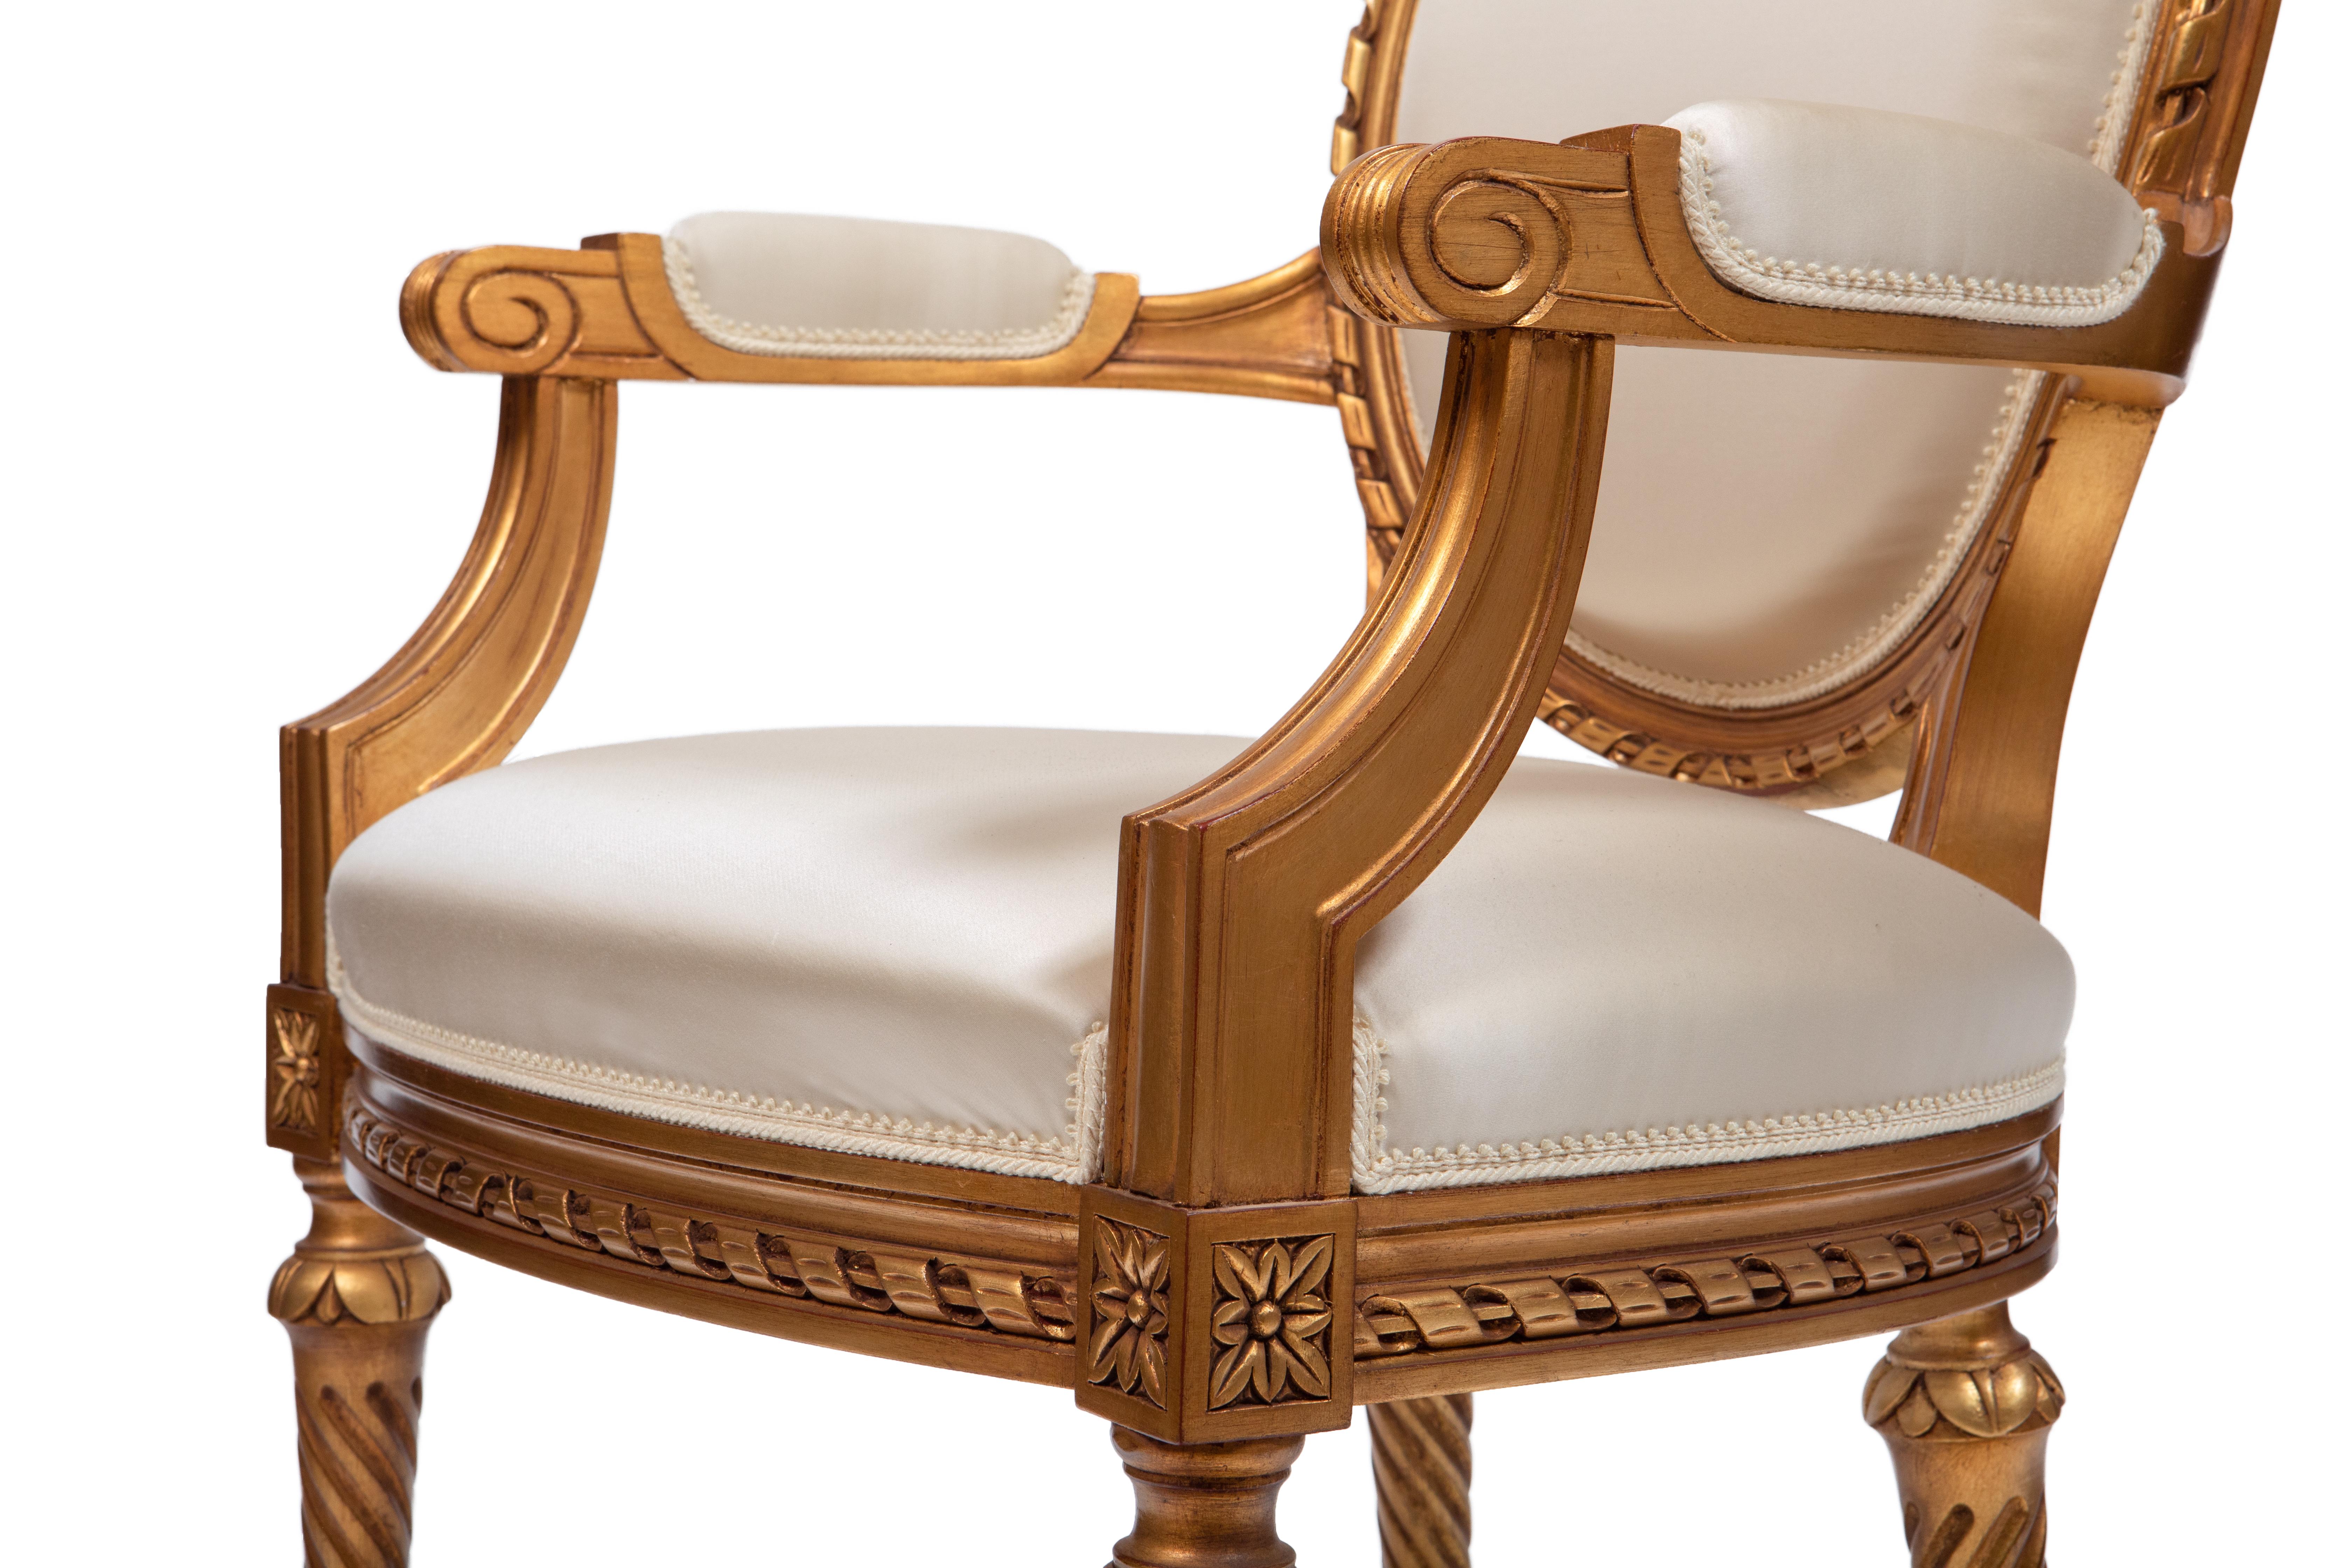 Gilt Luis XVI Style Armchair, Hand Carved and Gold Leaf Finishing, Made in Italy For Sale